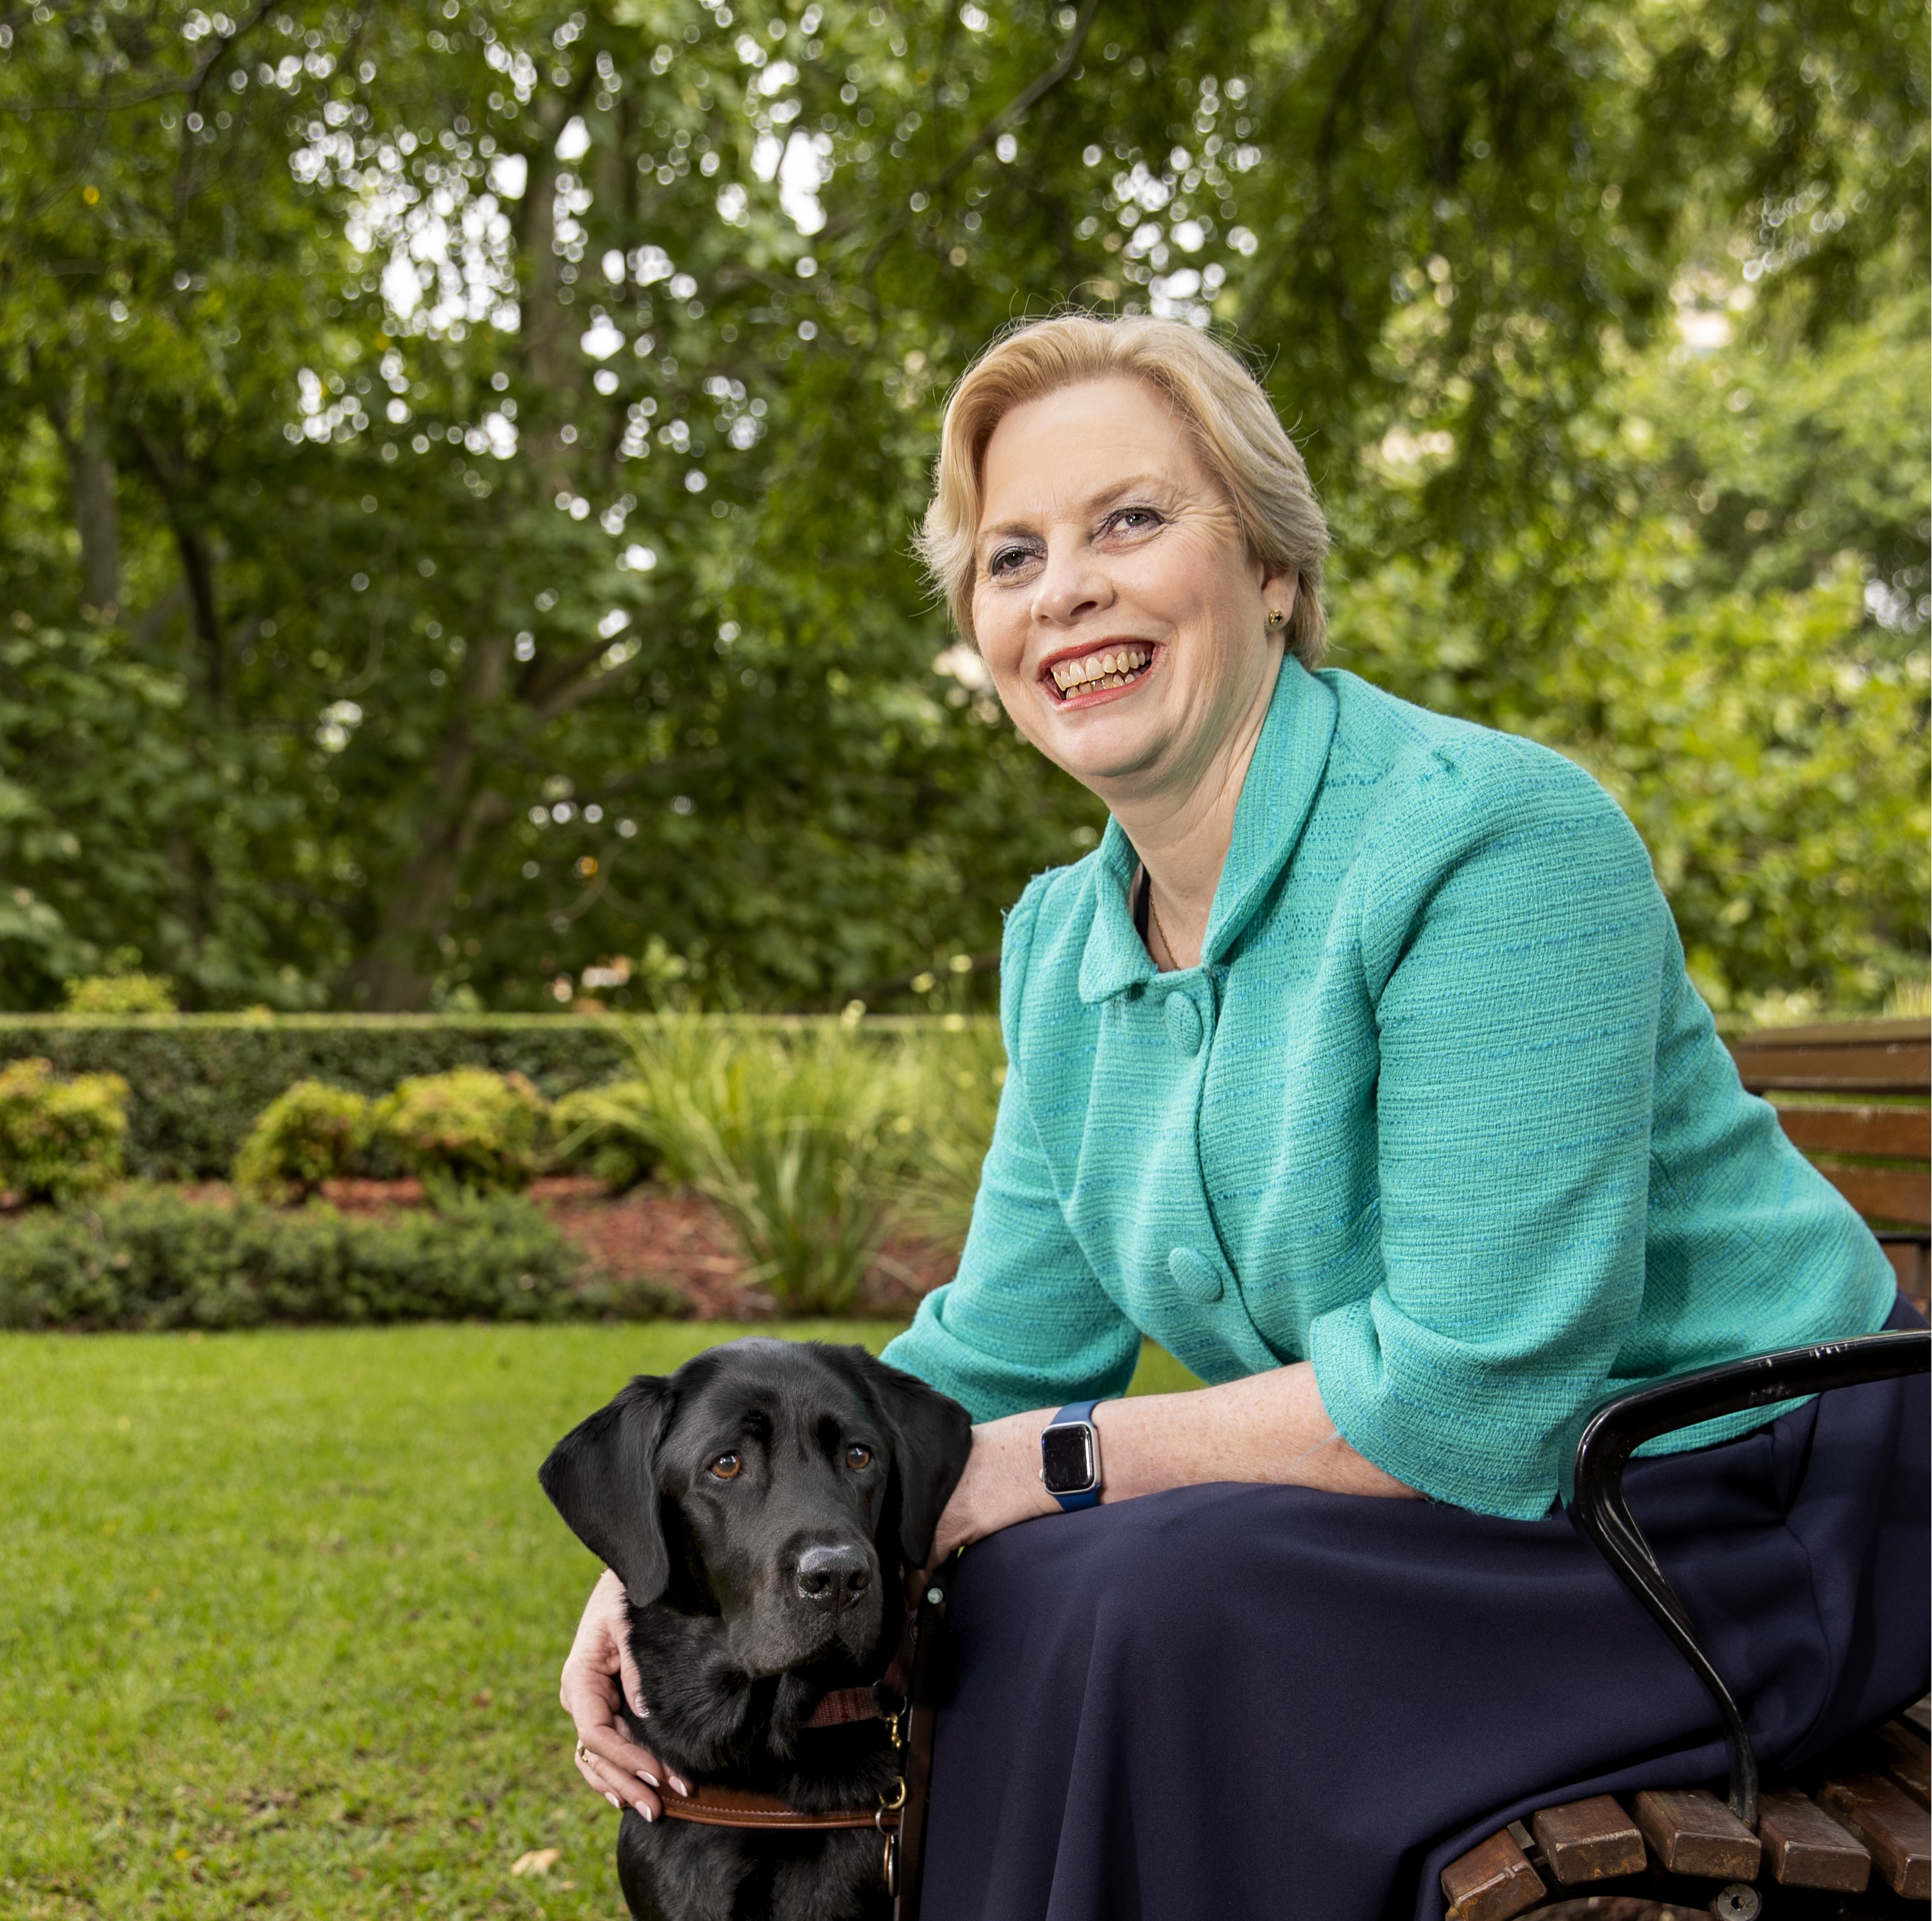 A woman is sitting on a park bench smiling with her guide dog